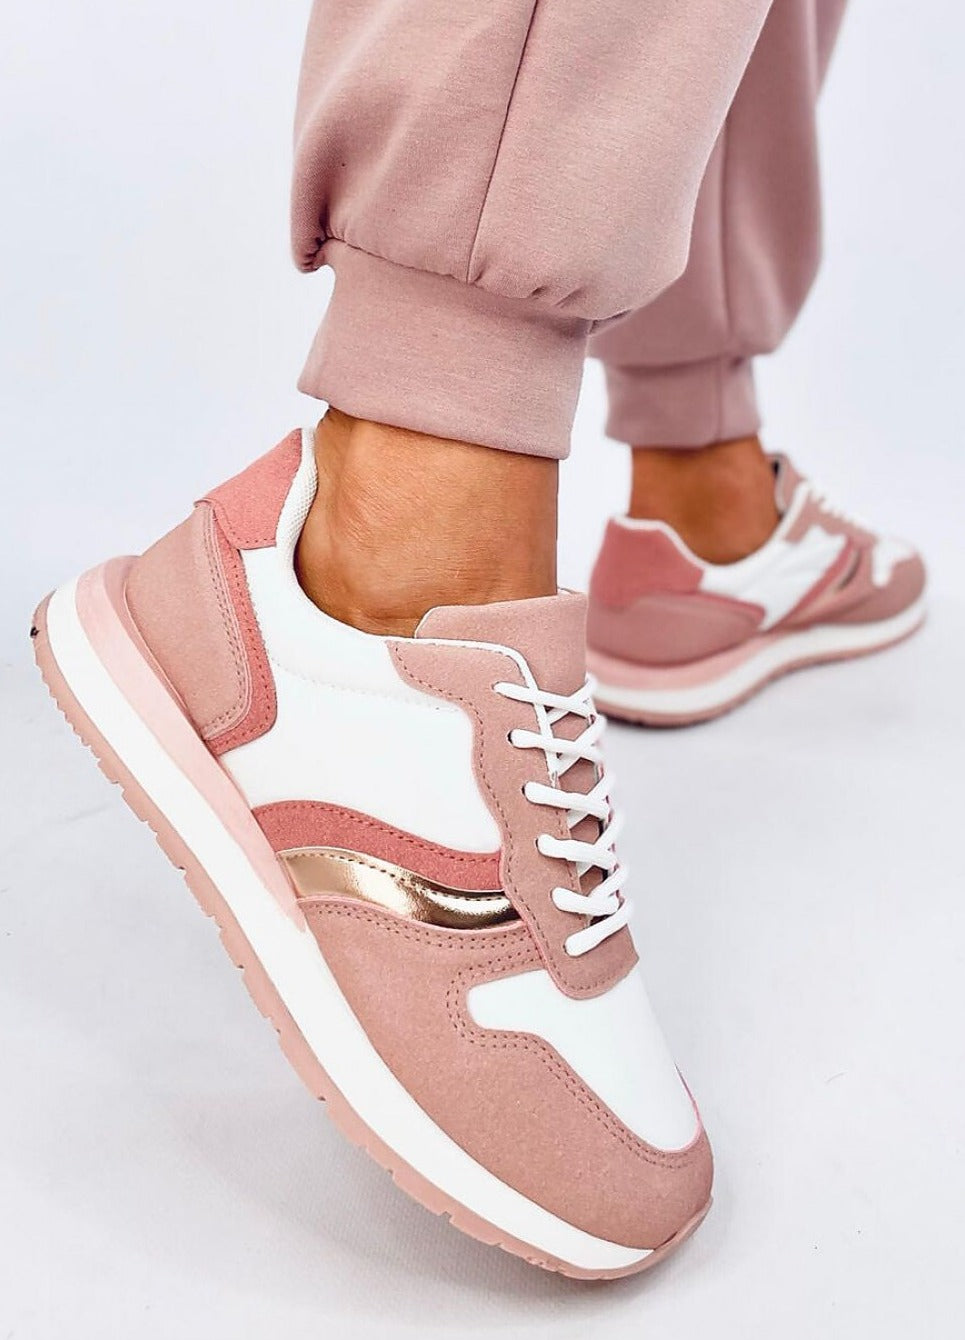 TEEK - Pink White Gold Laced Sneakers SHOES TEEK MH   